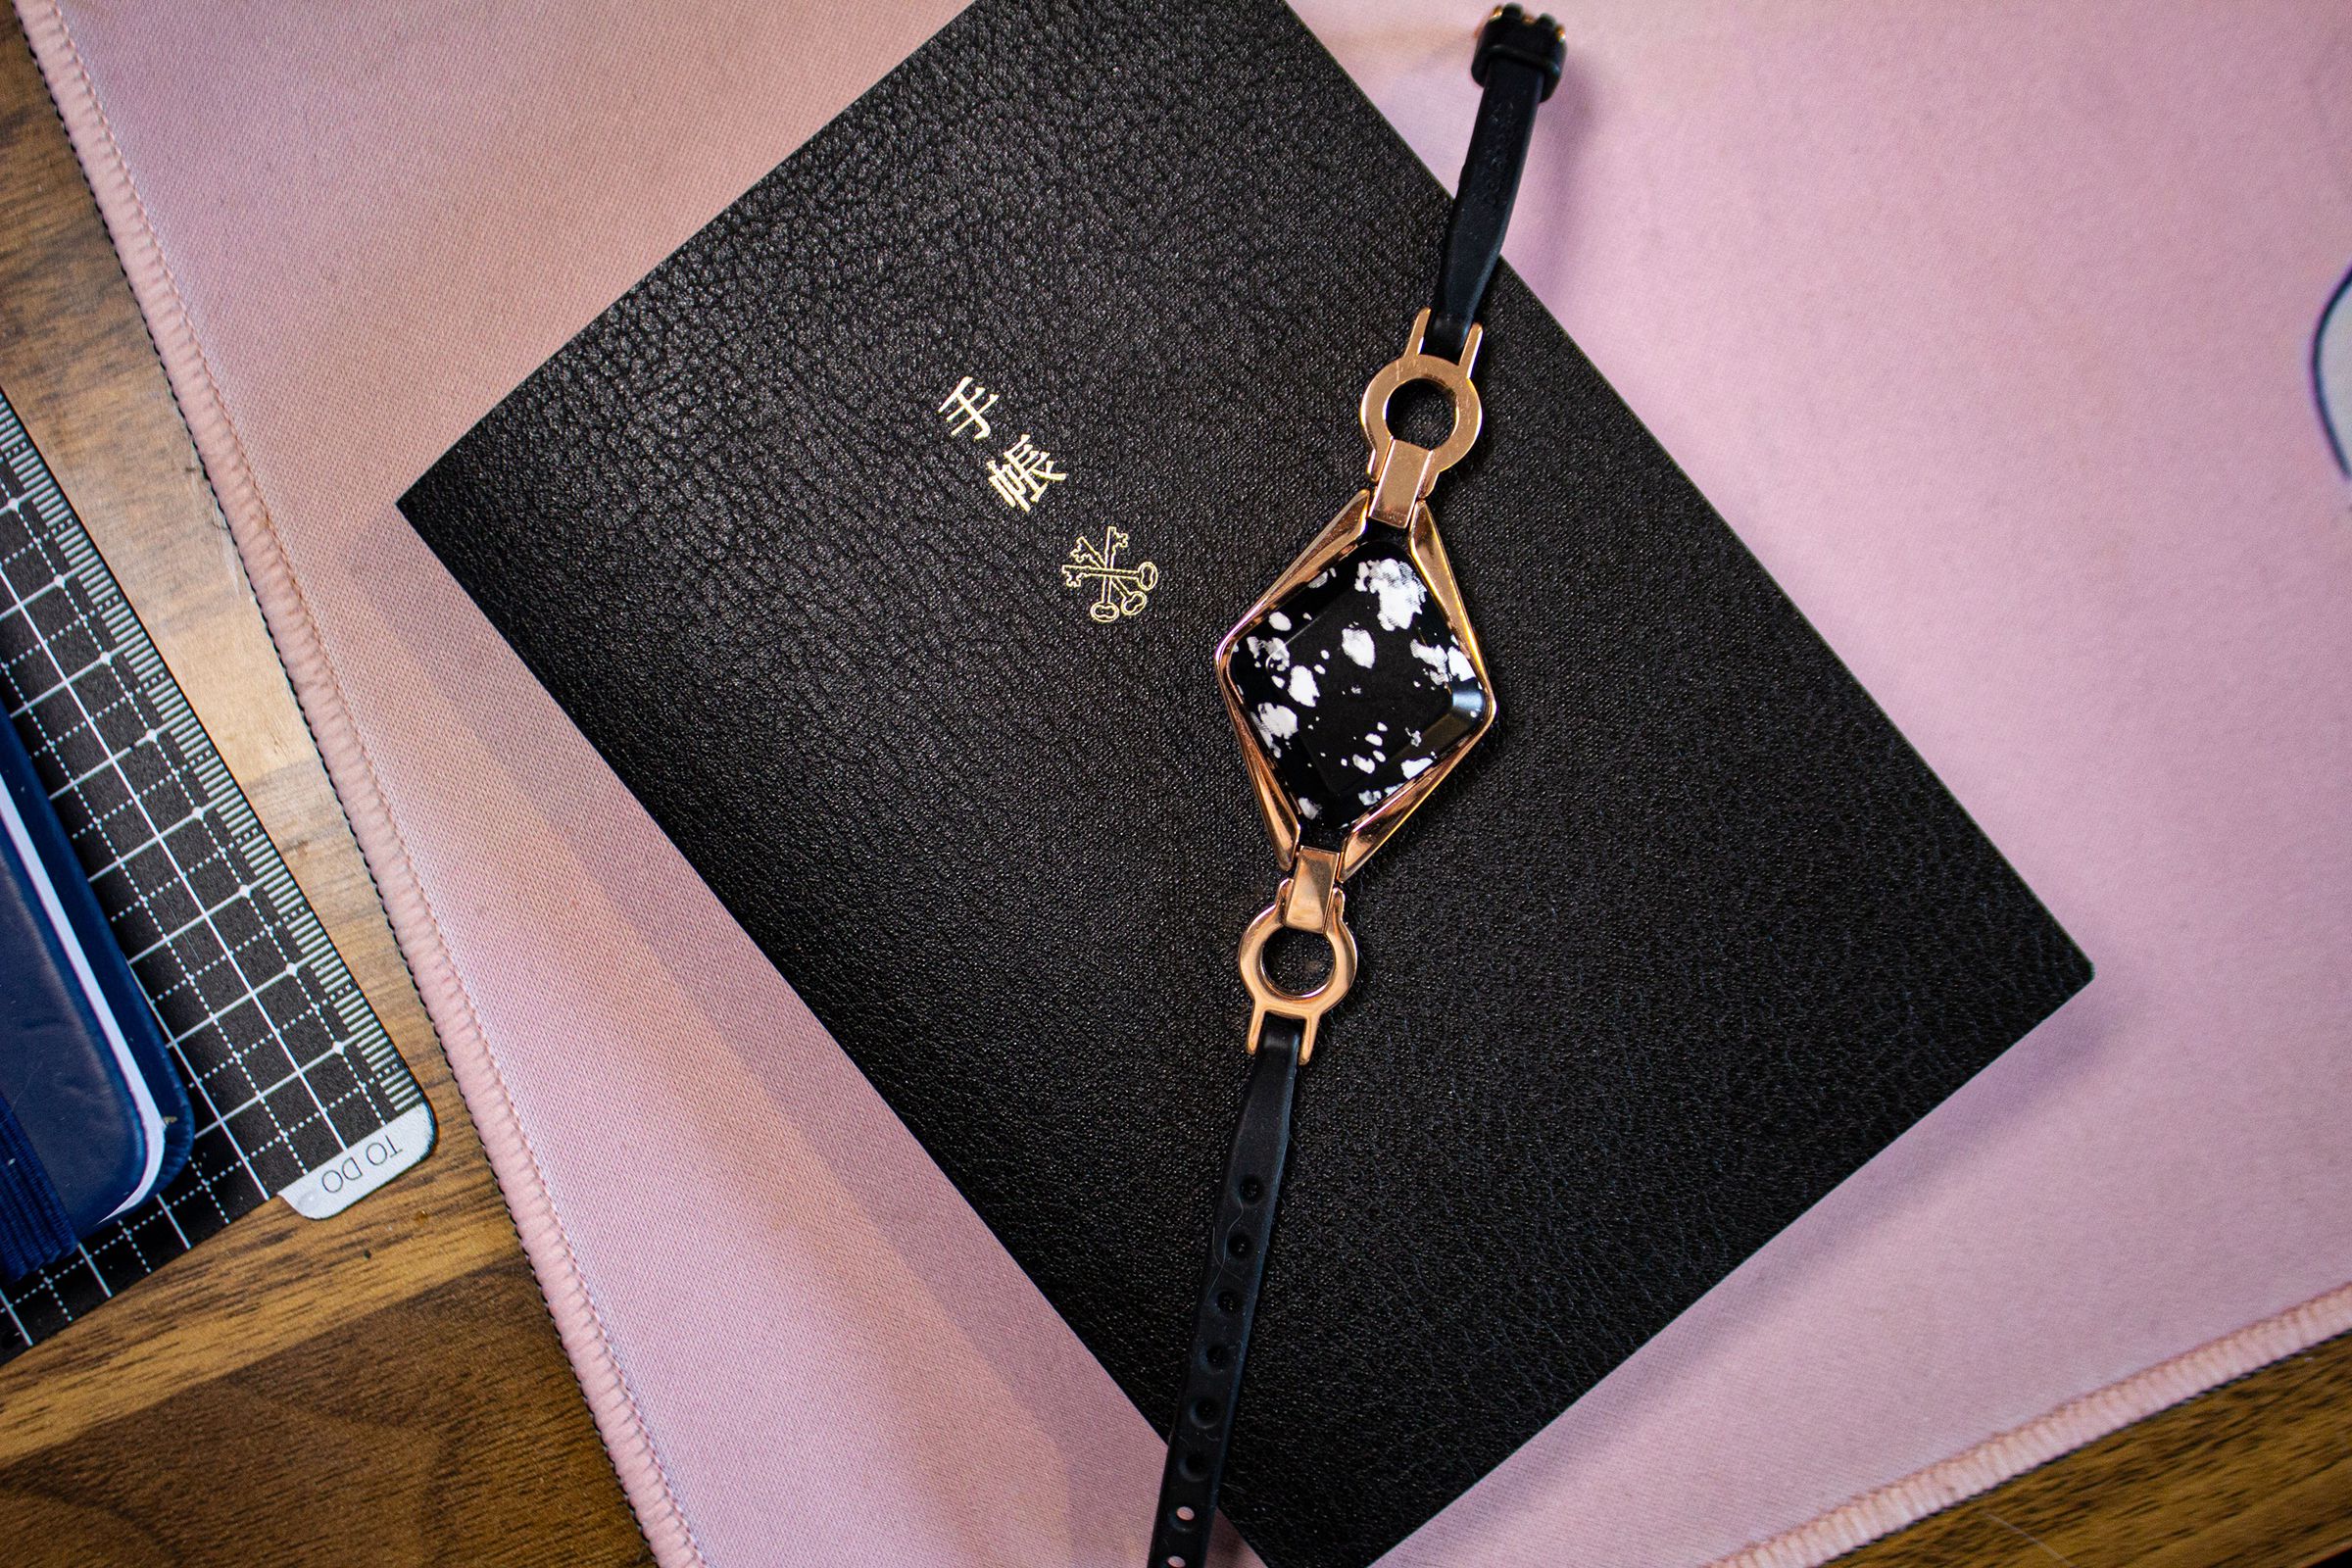 Bellabeat Ivy with black and white stone and rose gold lugs on top of a black notebook and pink desk pad